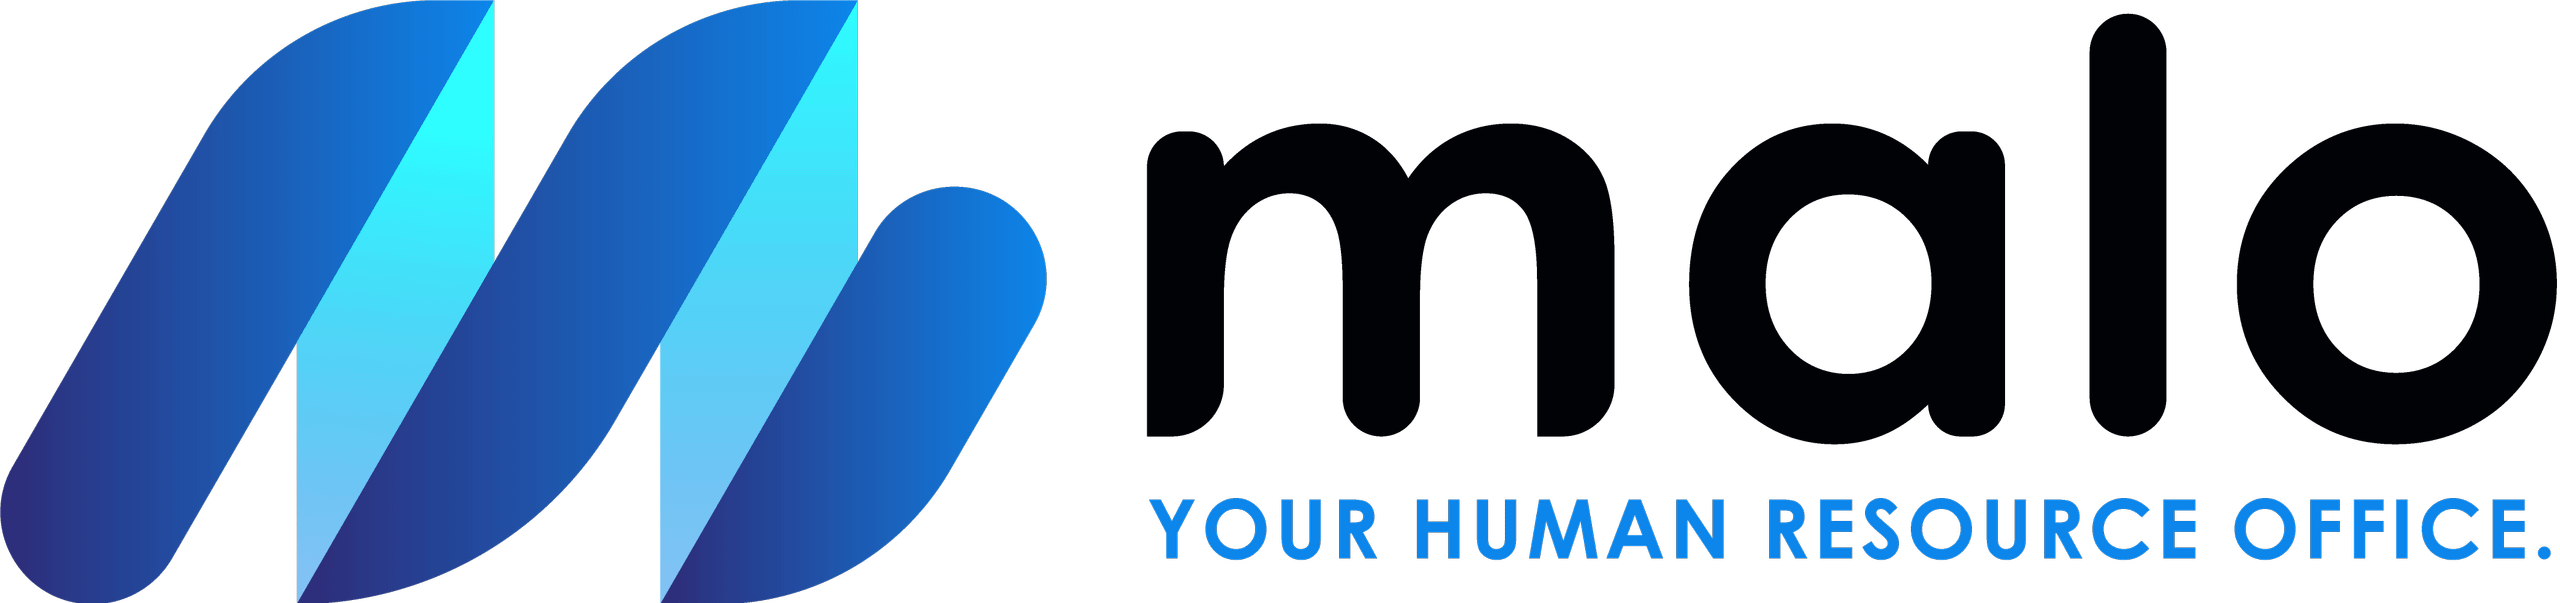 Malo HR - Your Human Resource Office - Risorse Umane